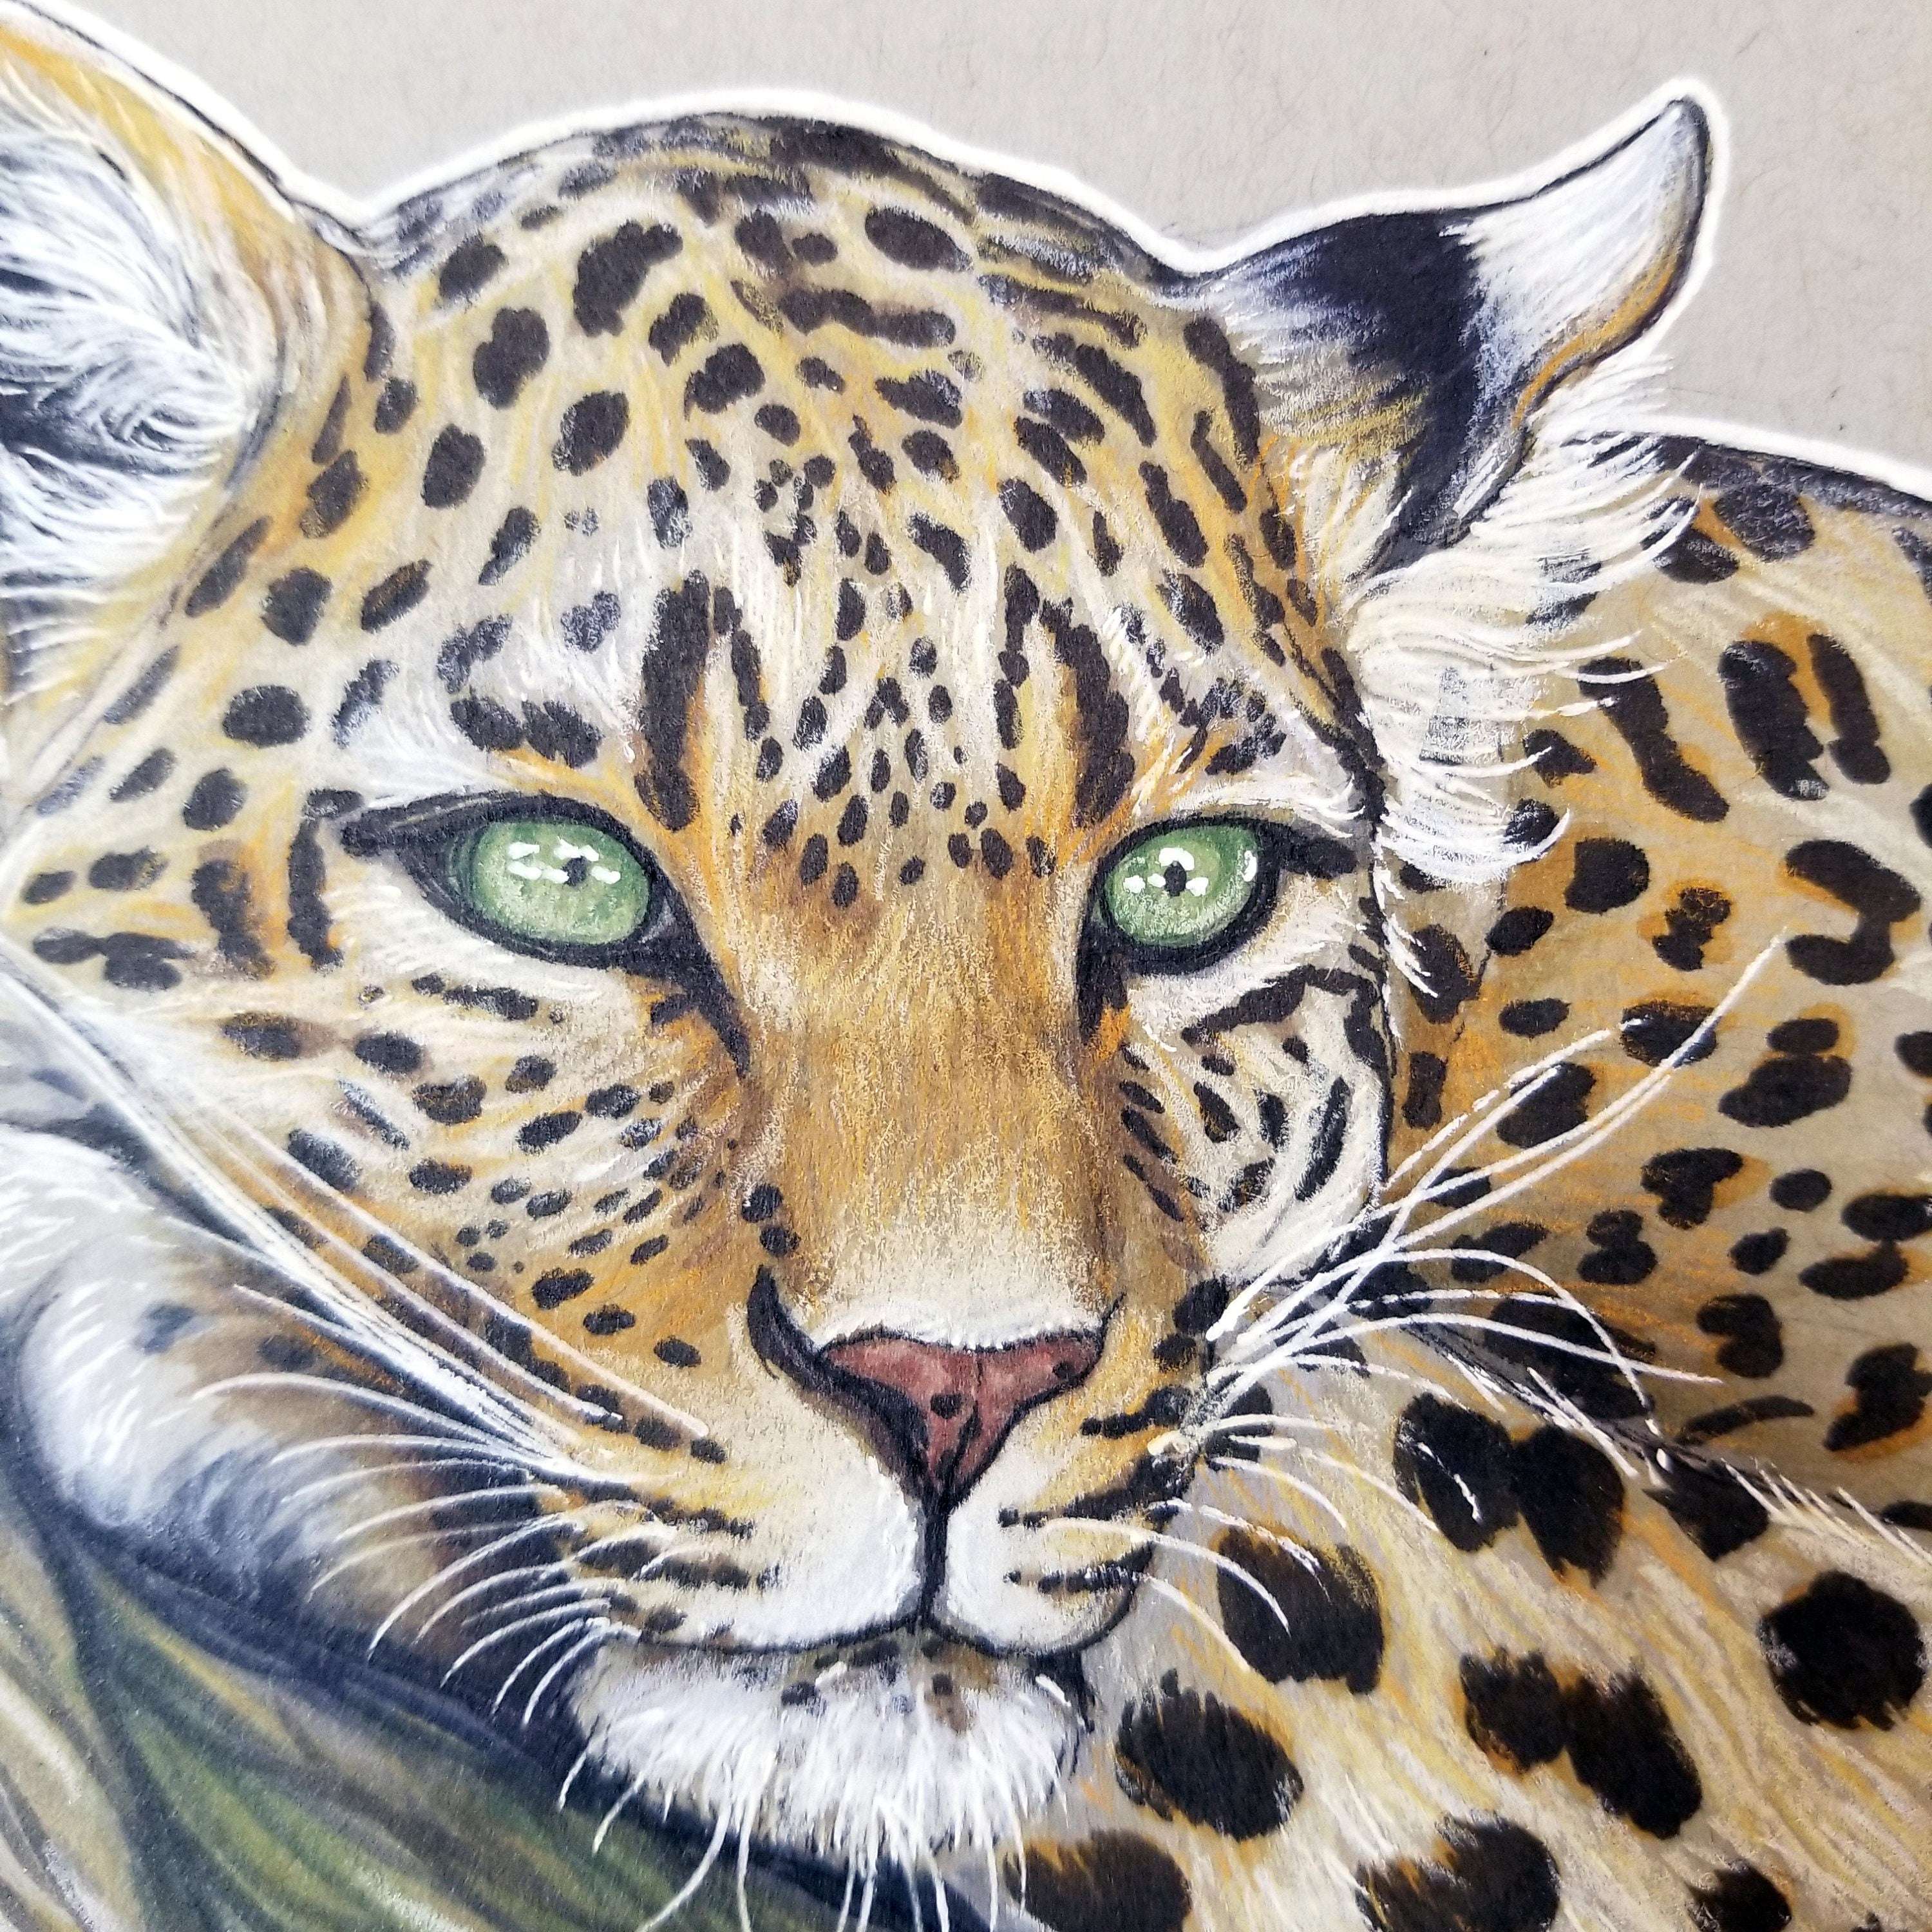 Close-up illustration of a Young Leopard with detailed fur patterns and striking green eyes on a textured background.